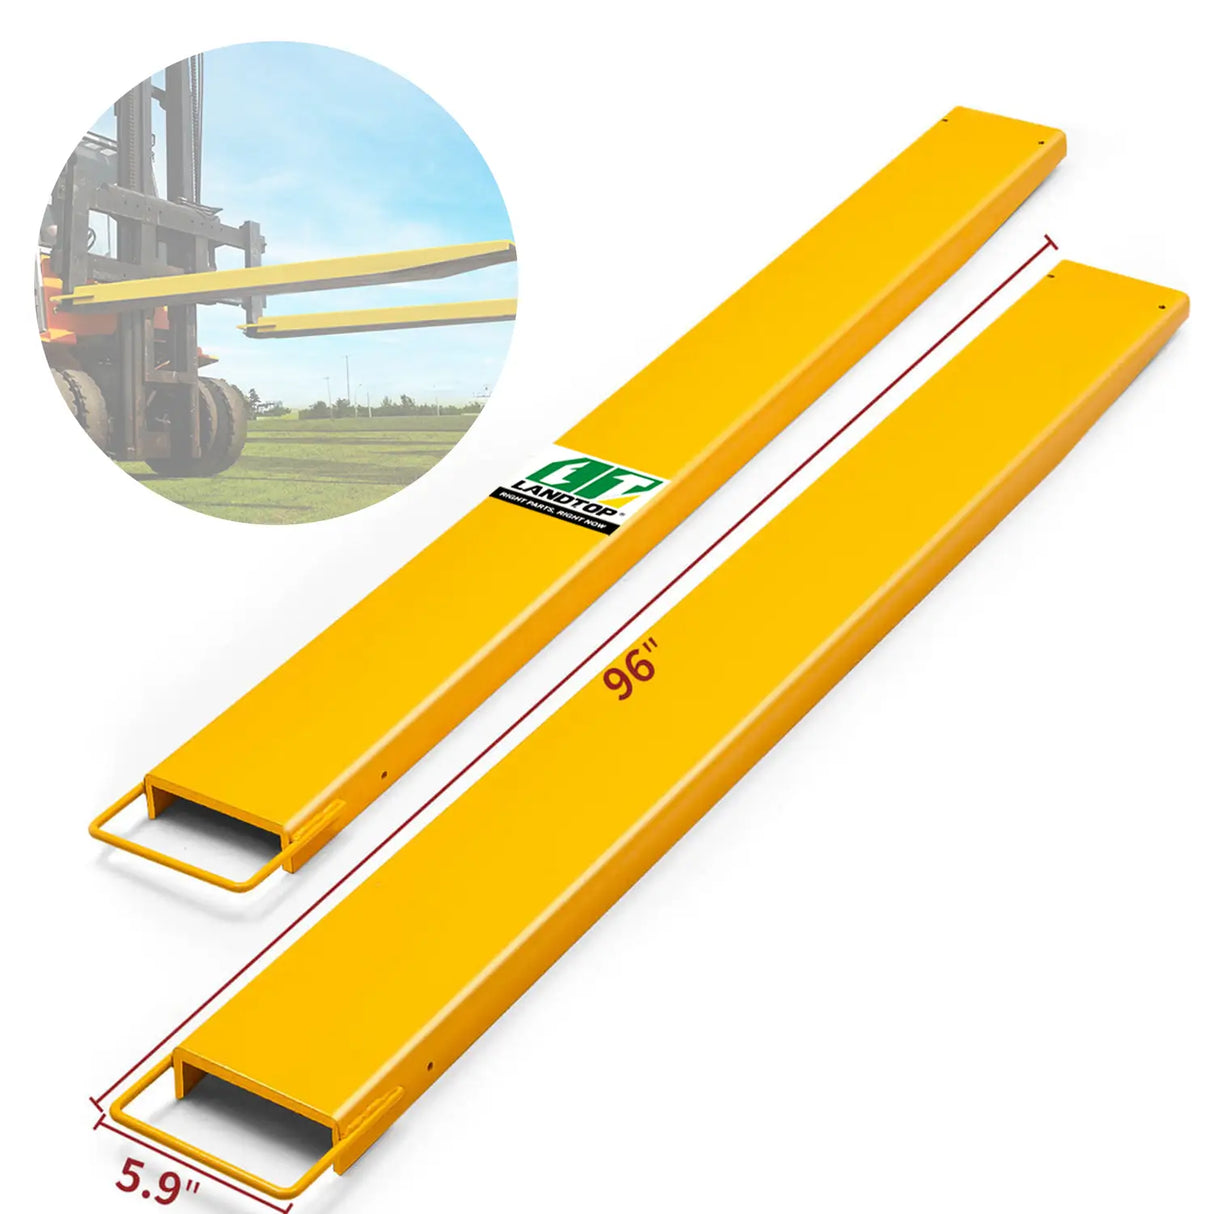 Pallet Fork Extension 96 Inch Length 4.5 Inch Width, Heavy Duty Steel Pallet Extensions for Forklift Truck, Yellow